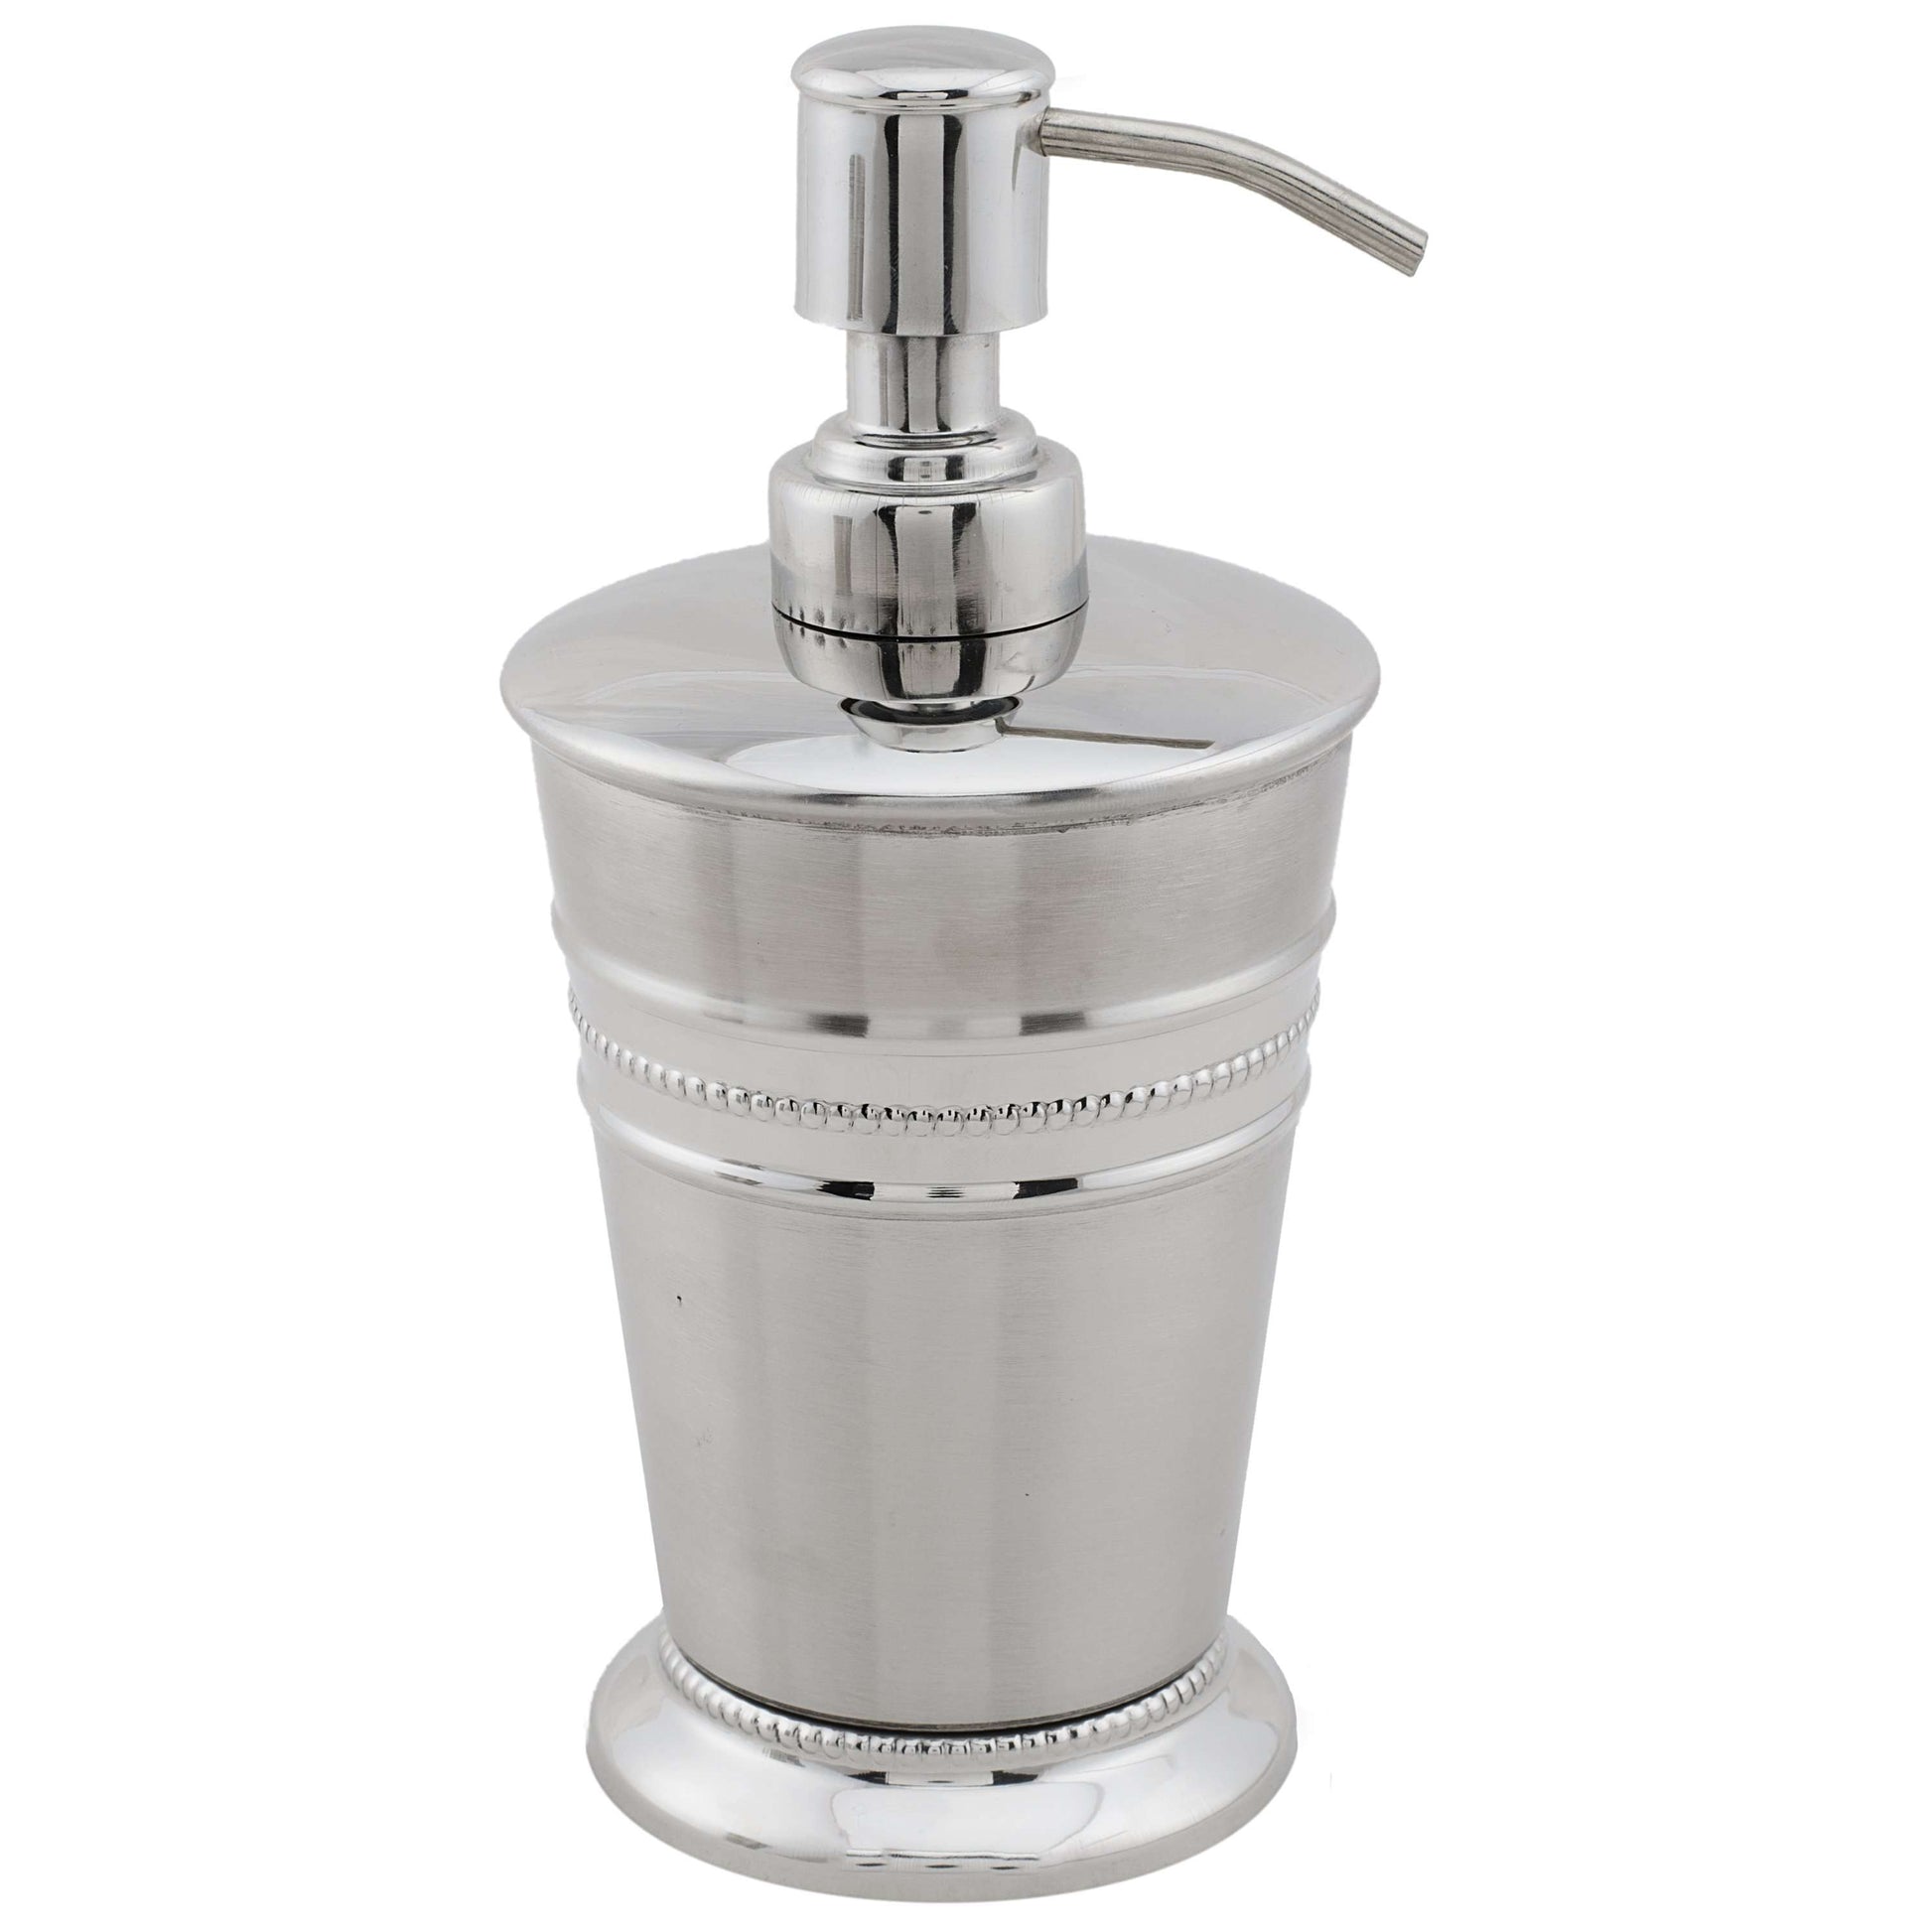 SWHF High Grade Stainless Steel Beeded Soap Dispenser and Soap Pump - SWHF